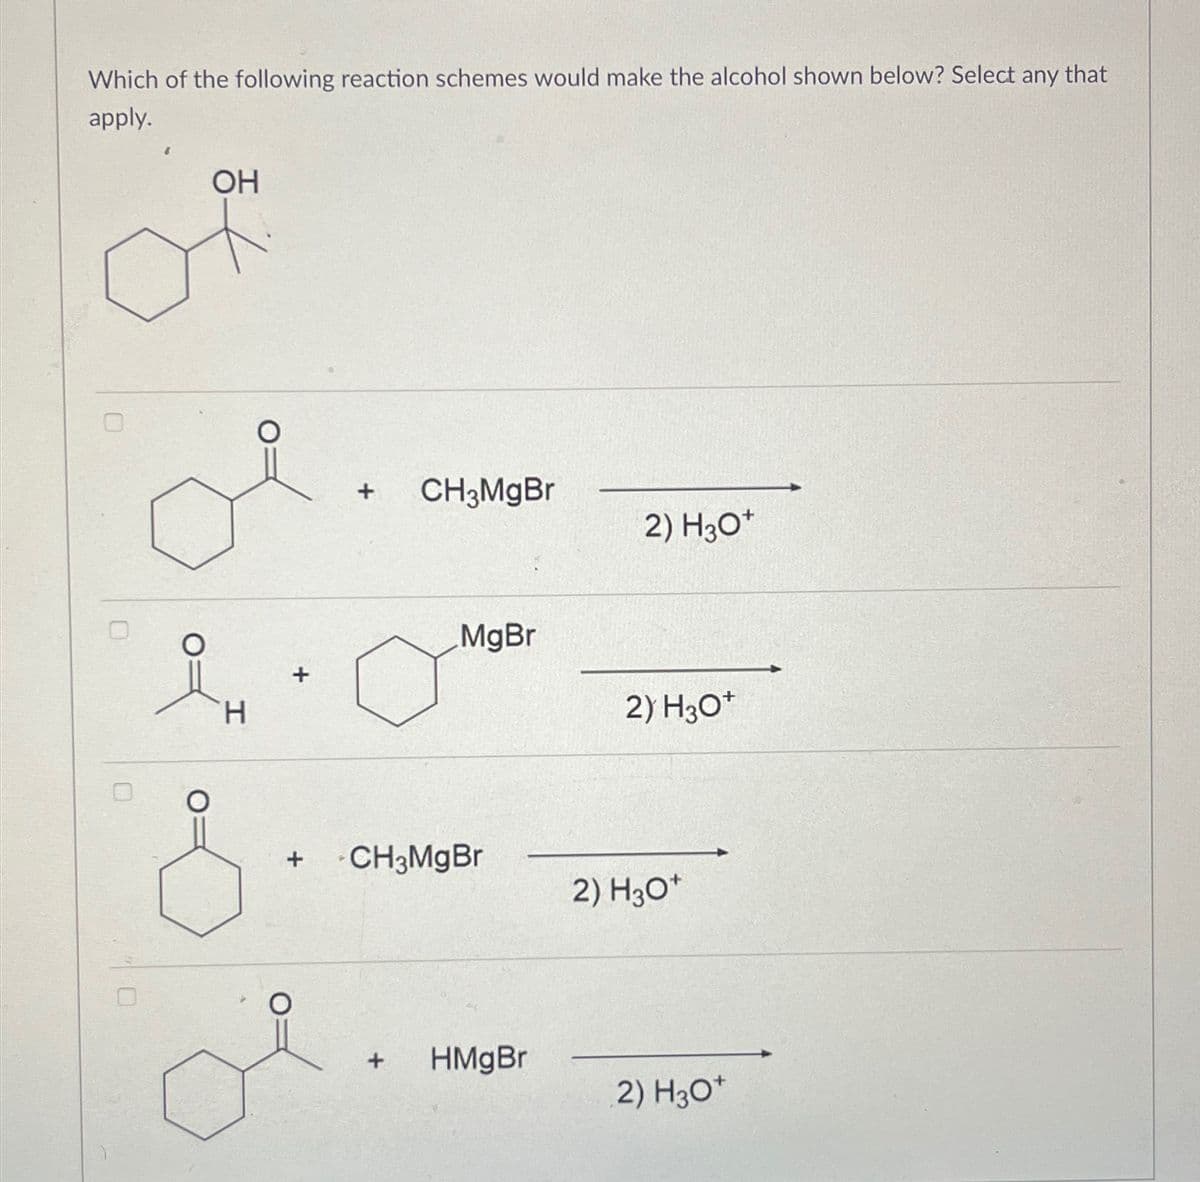 Which of the following reaction schemes would make the alcohol shown below? Select any that
apply.
OH
요
H
+
+
CH3MgBr
2) H3O+
MgBr
2) H3O+
+
CH3MgBr
2) H3O+
+
HMgBr
2) H3O+